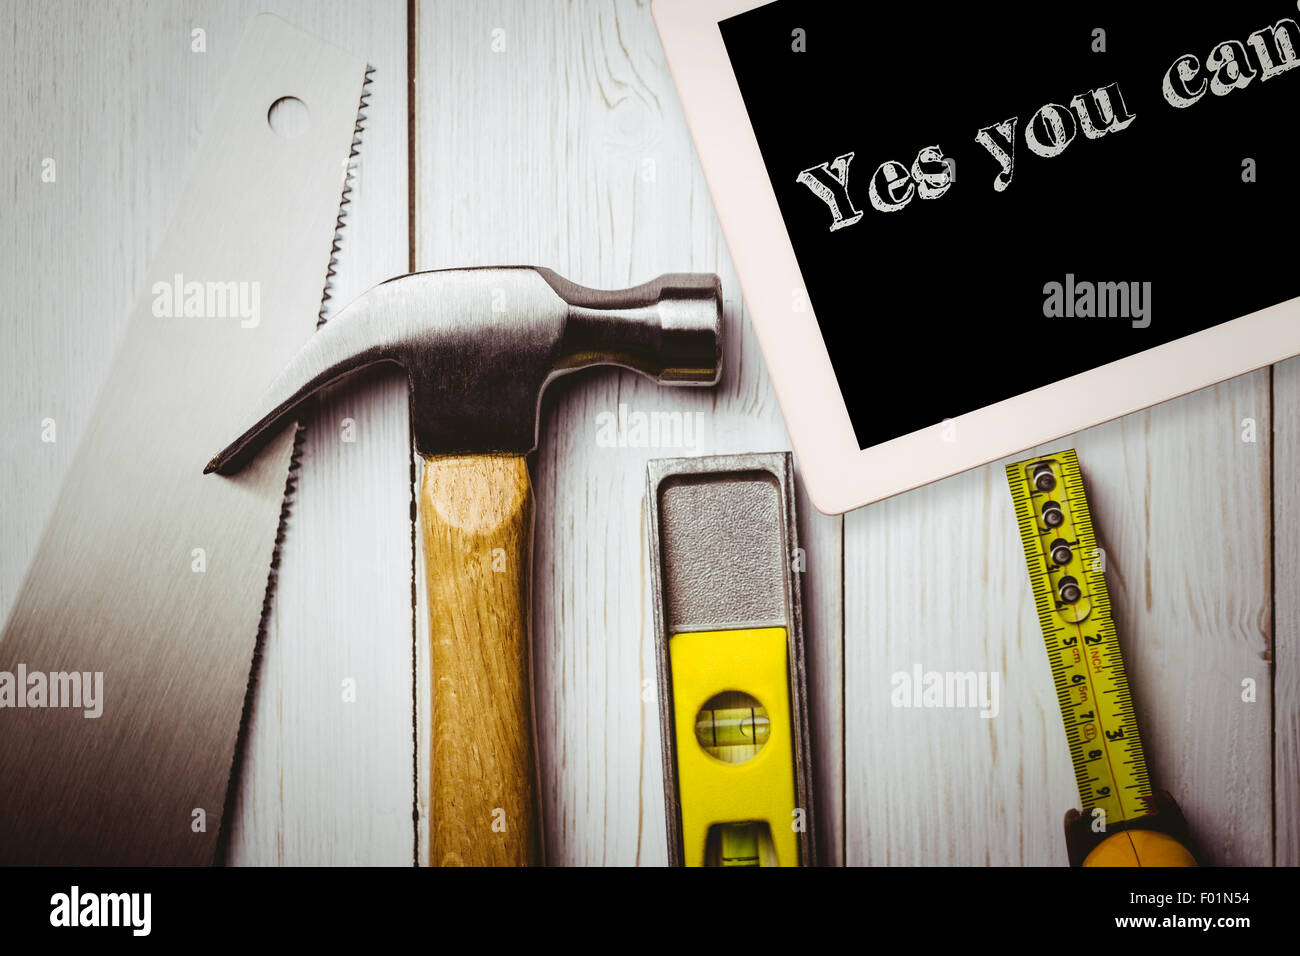 Yes you can! against desk with tools Stock Photo